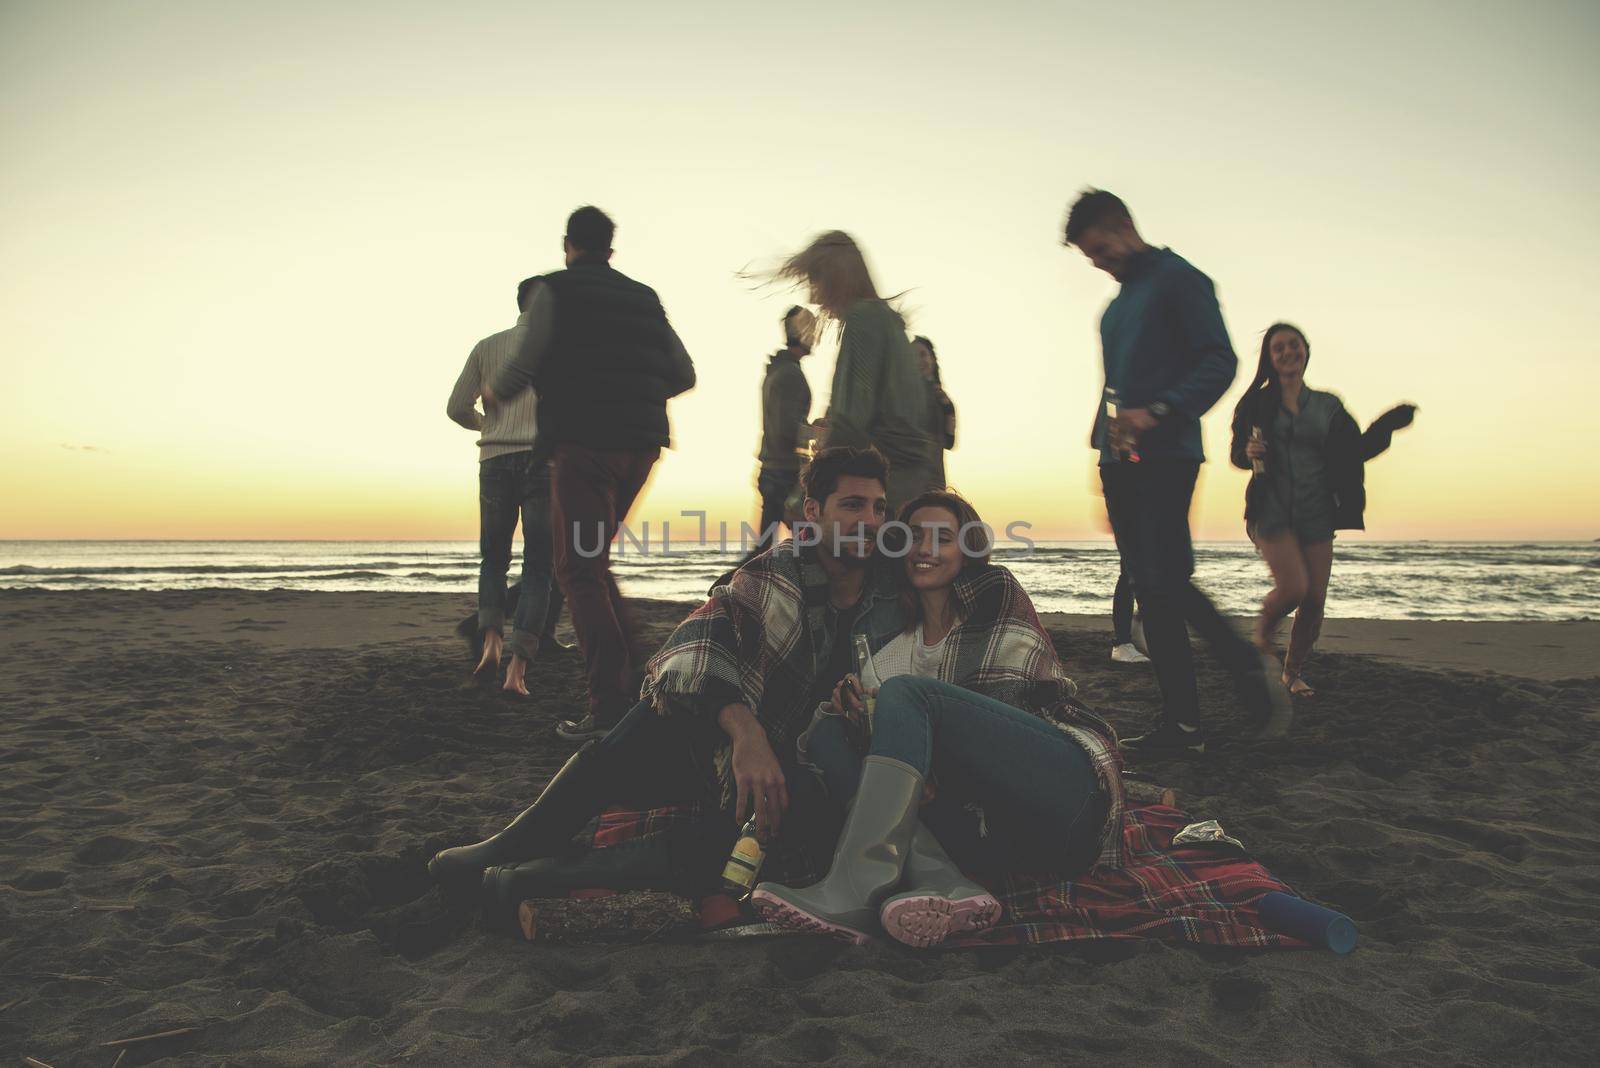 Young Couple enjoying with friends Around Campfire on The Beach At sunset drinking beer